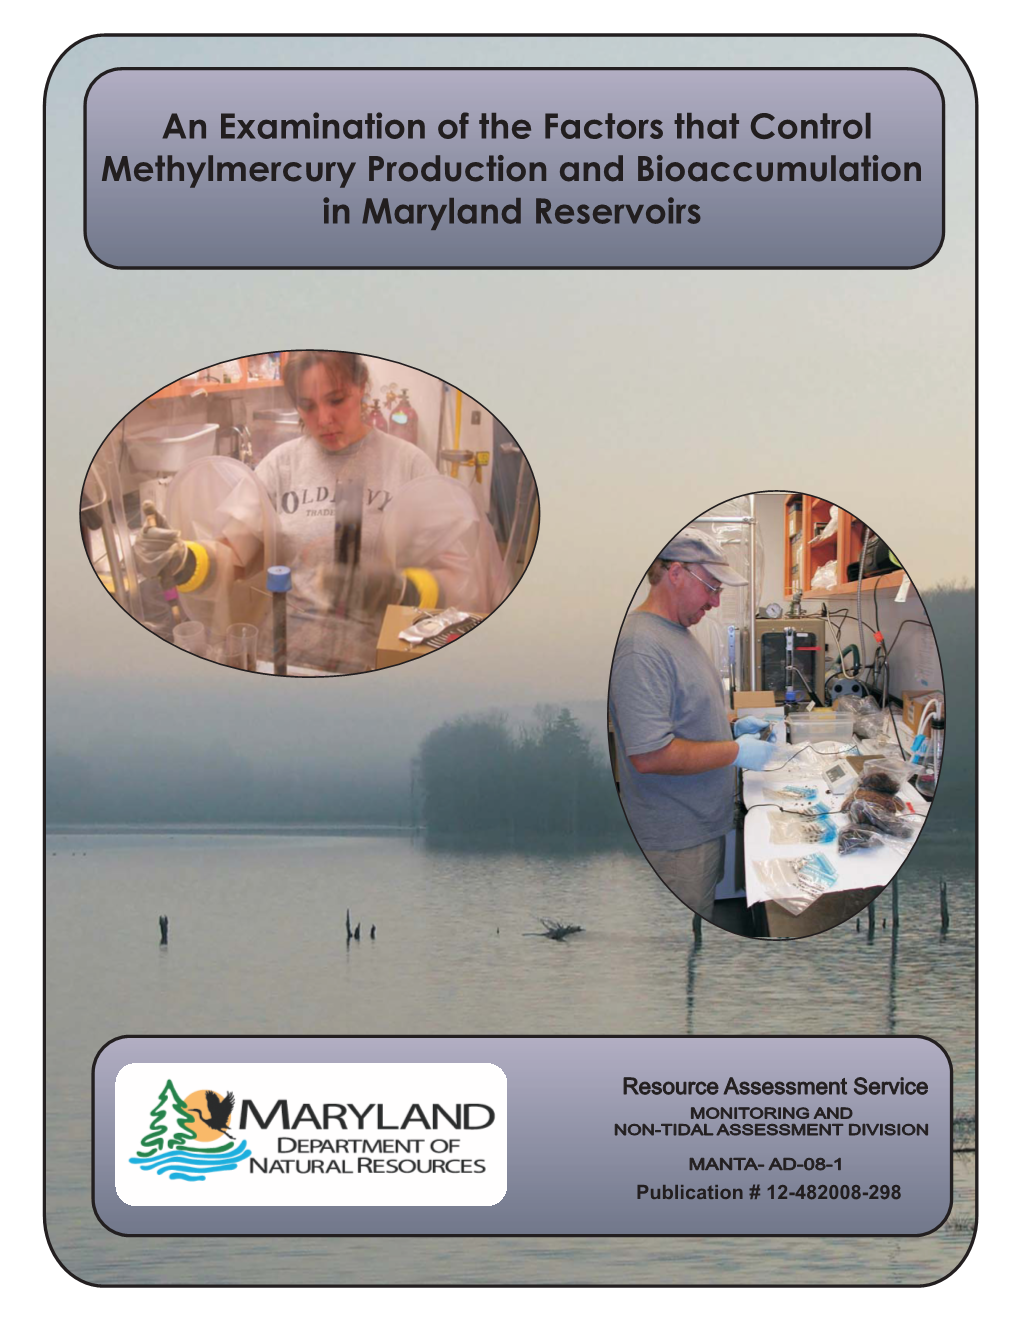 An Examination of the Factors That Control Methylmercury Production and Bioaccumulation in Maryland Reservoirs